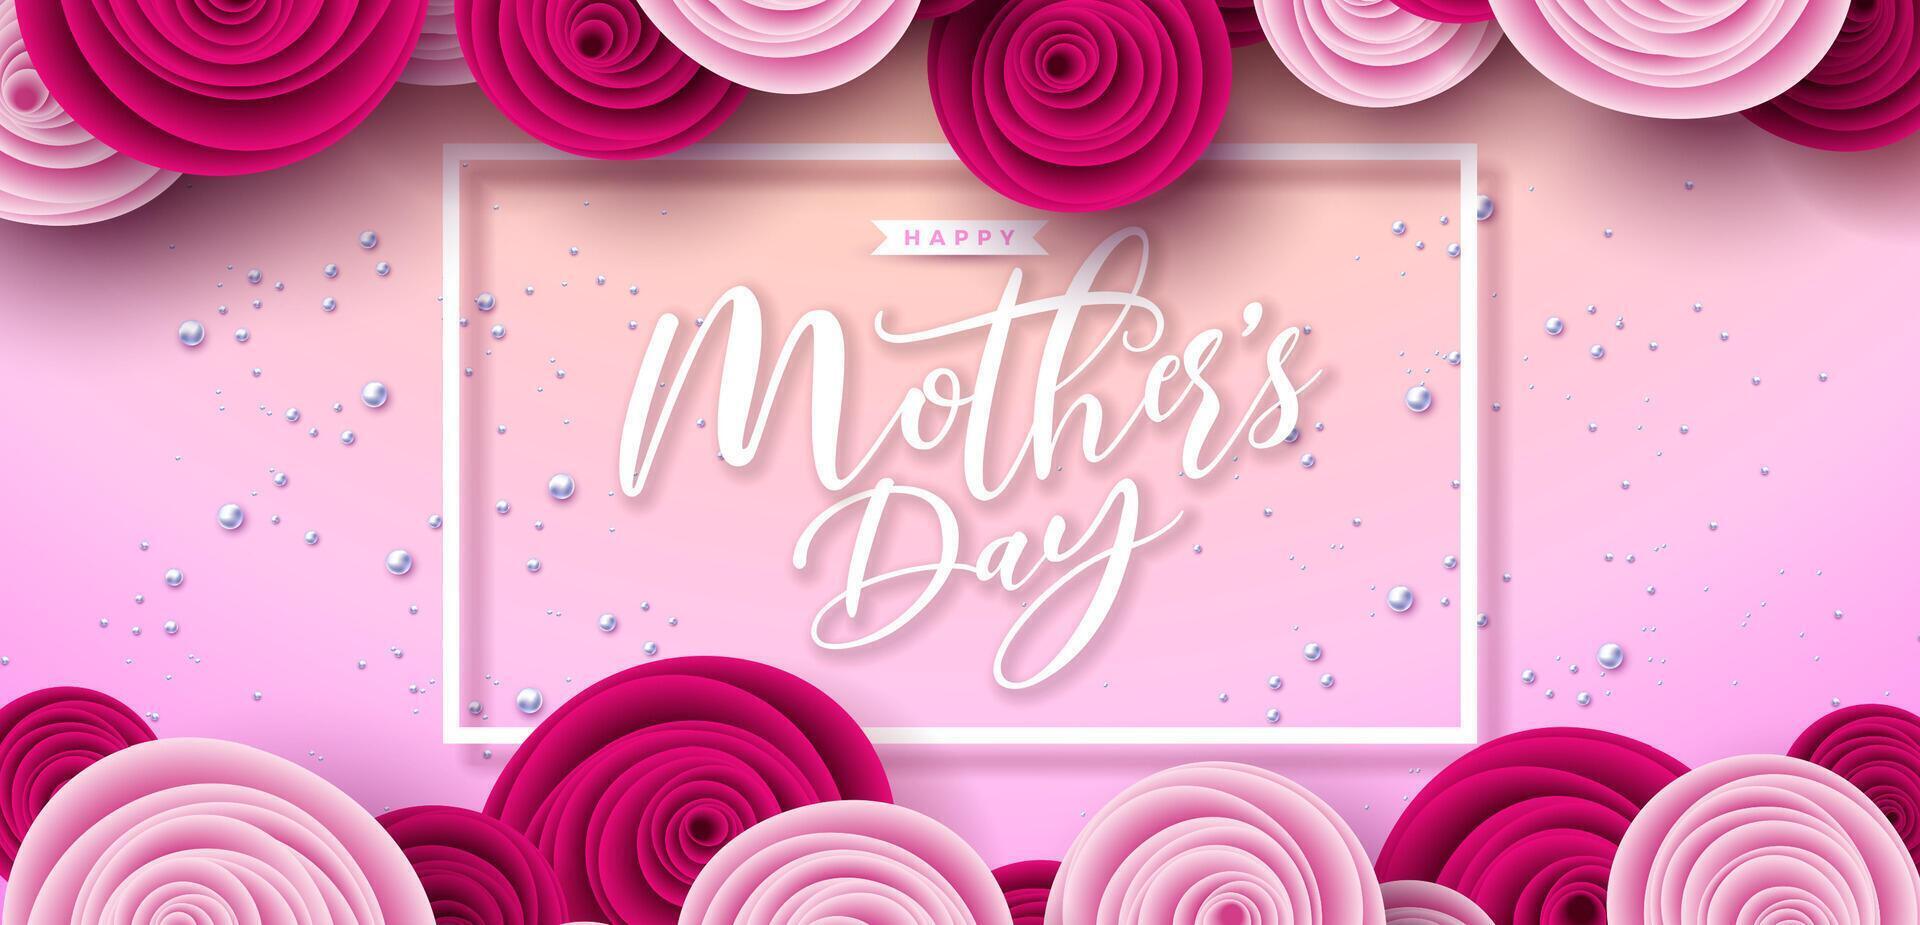 Happy Mother's Day Banner or Postcard with Paper Hearts and Rose Flower on Pink Background. Vector Mom Celebration Design with Symbol of Love for Greeting Card, Flyer, Invitation, Brochure, Poster.